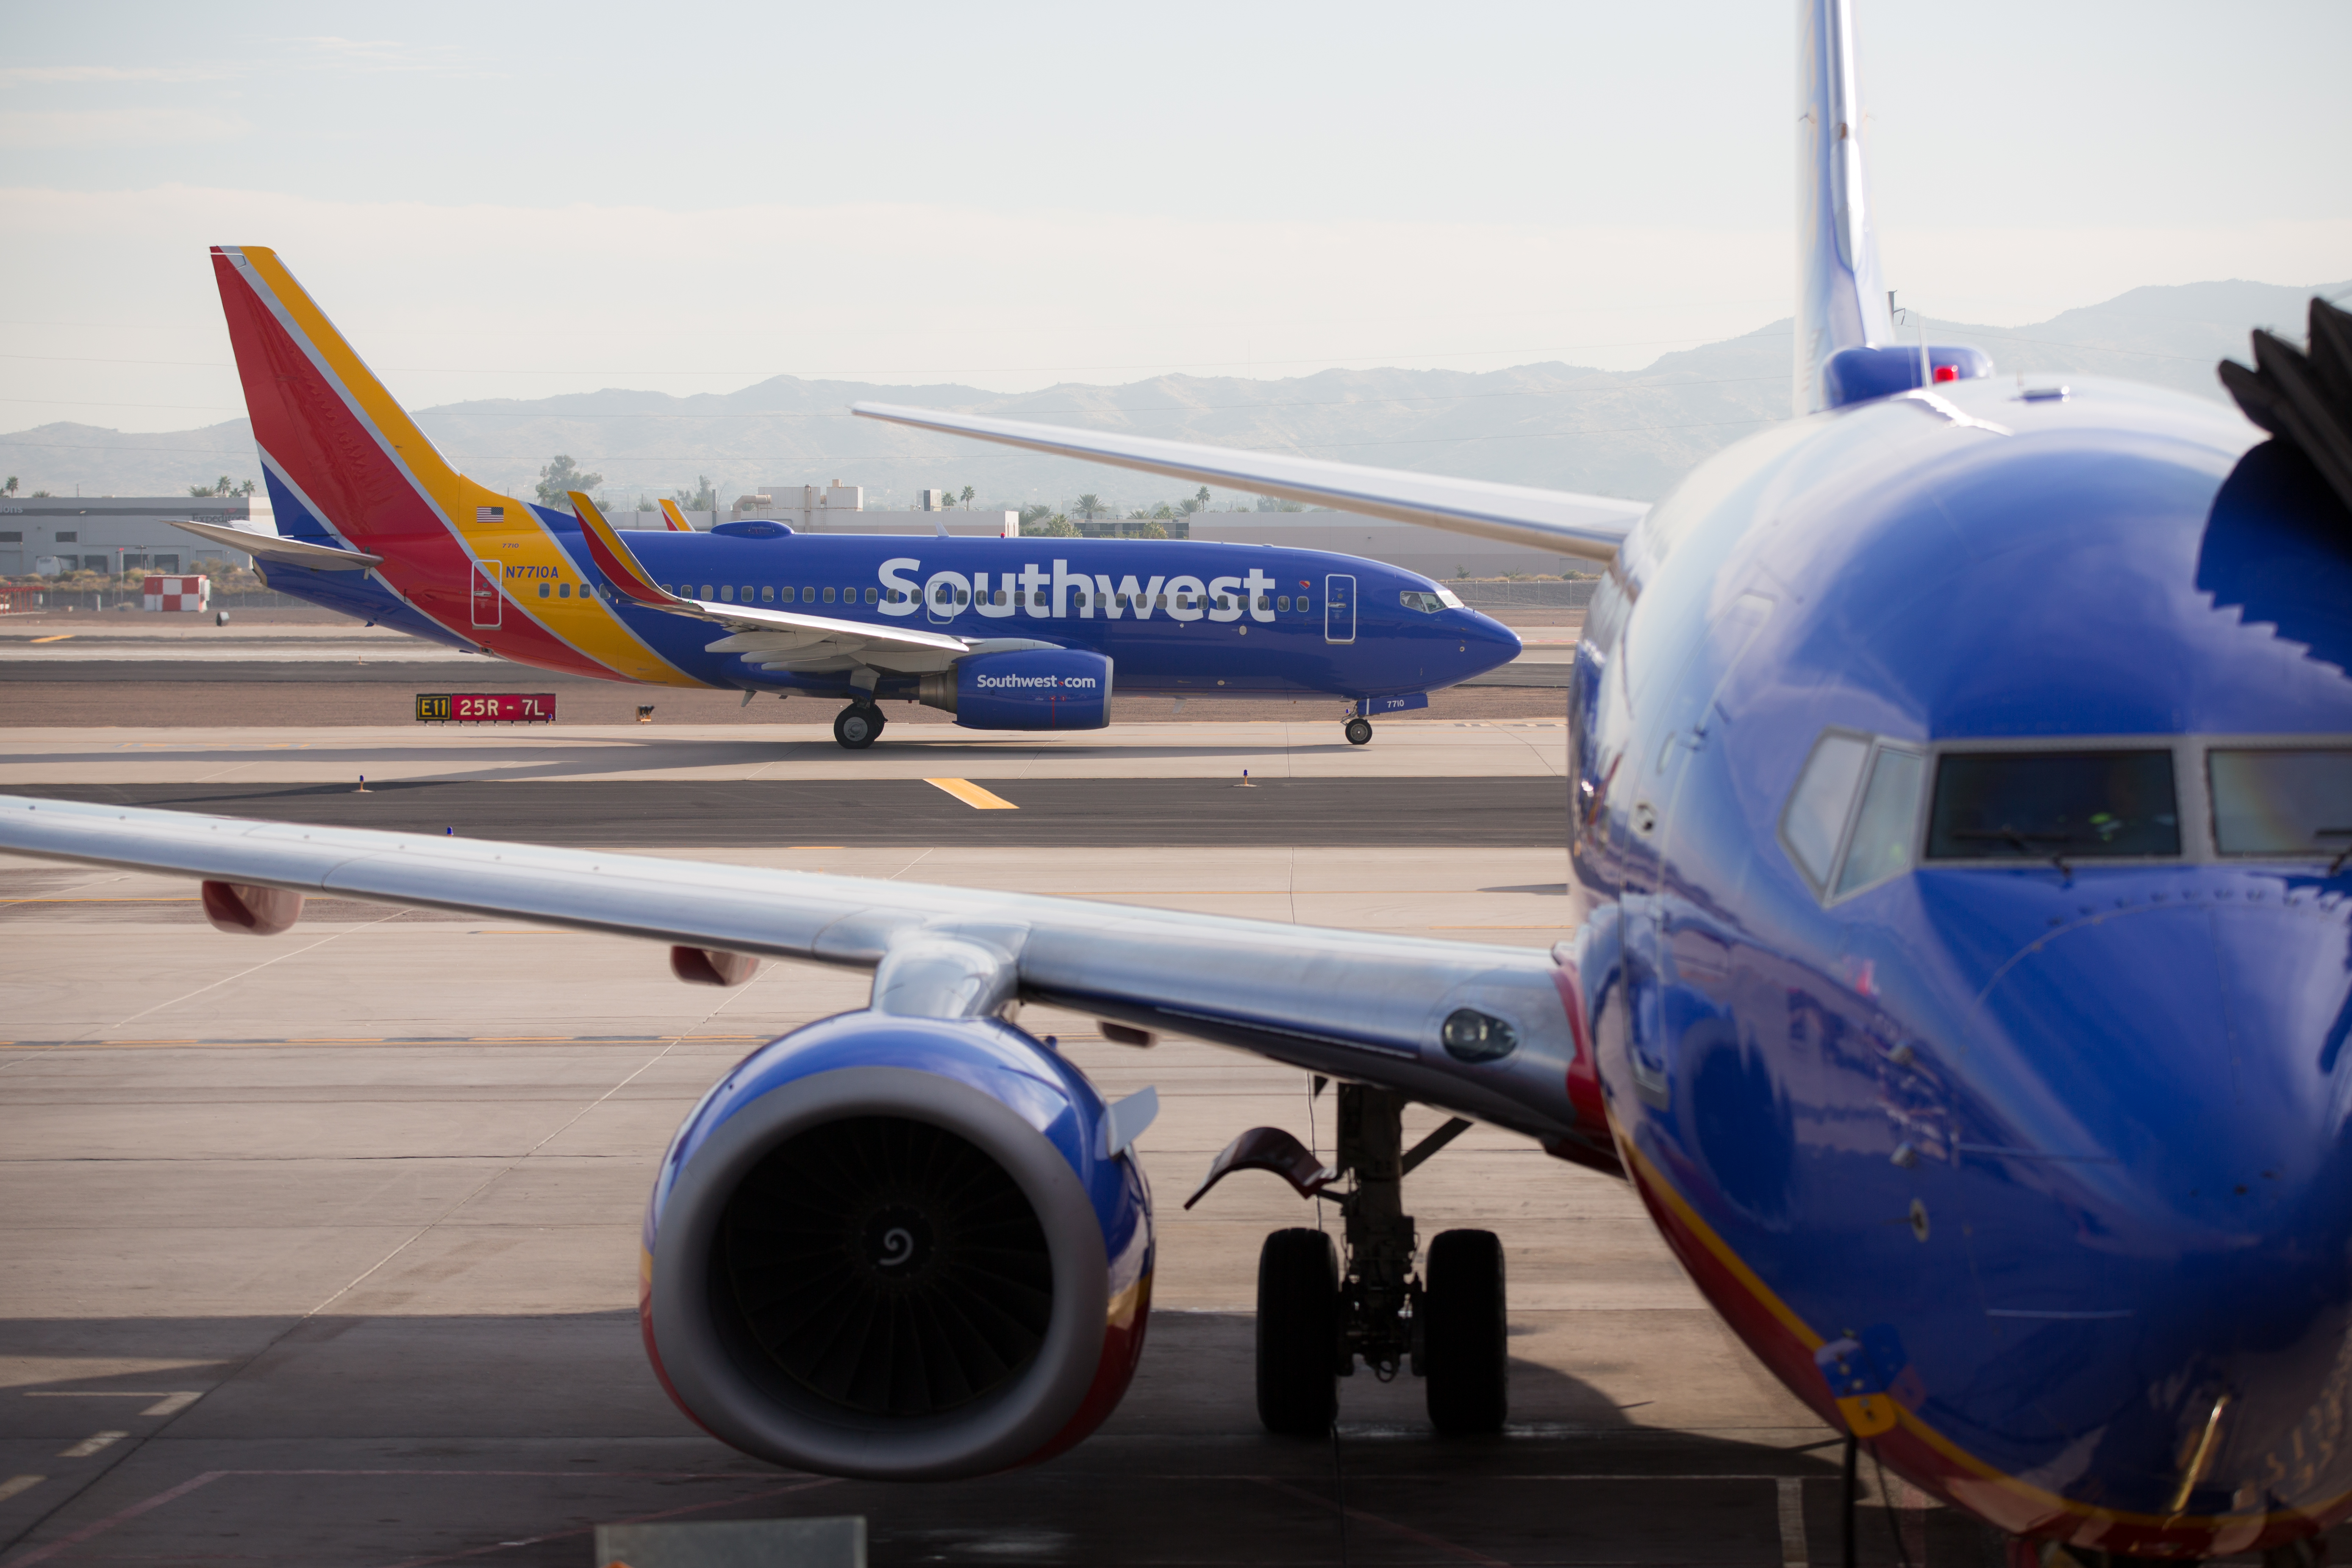 April 2016 Schedule is Here! No Foolin'! - The Southwest Airlines Community